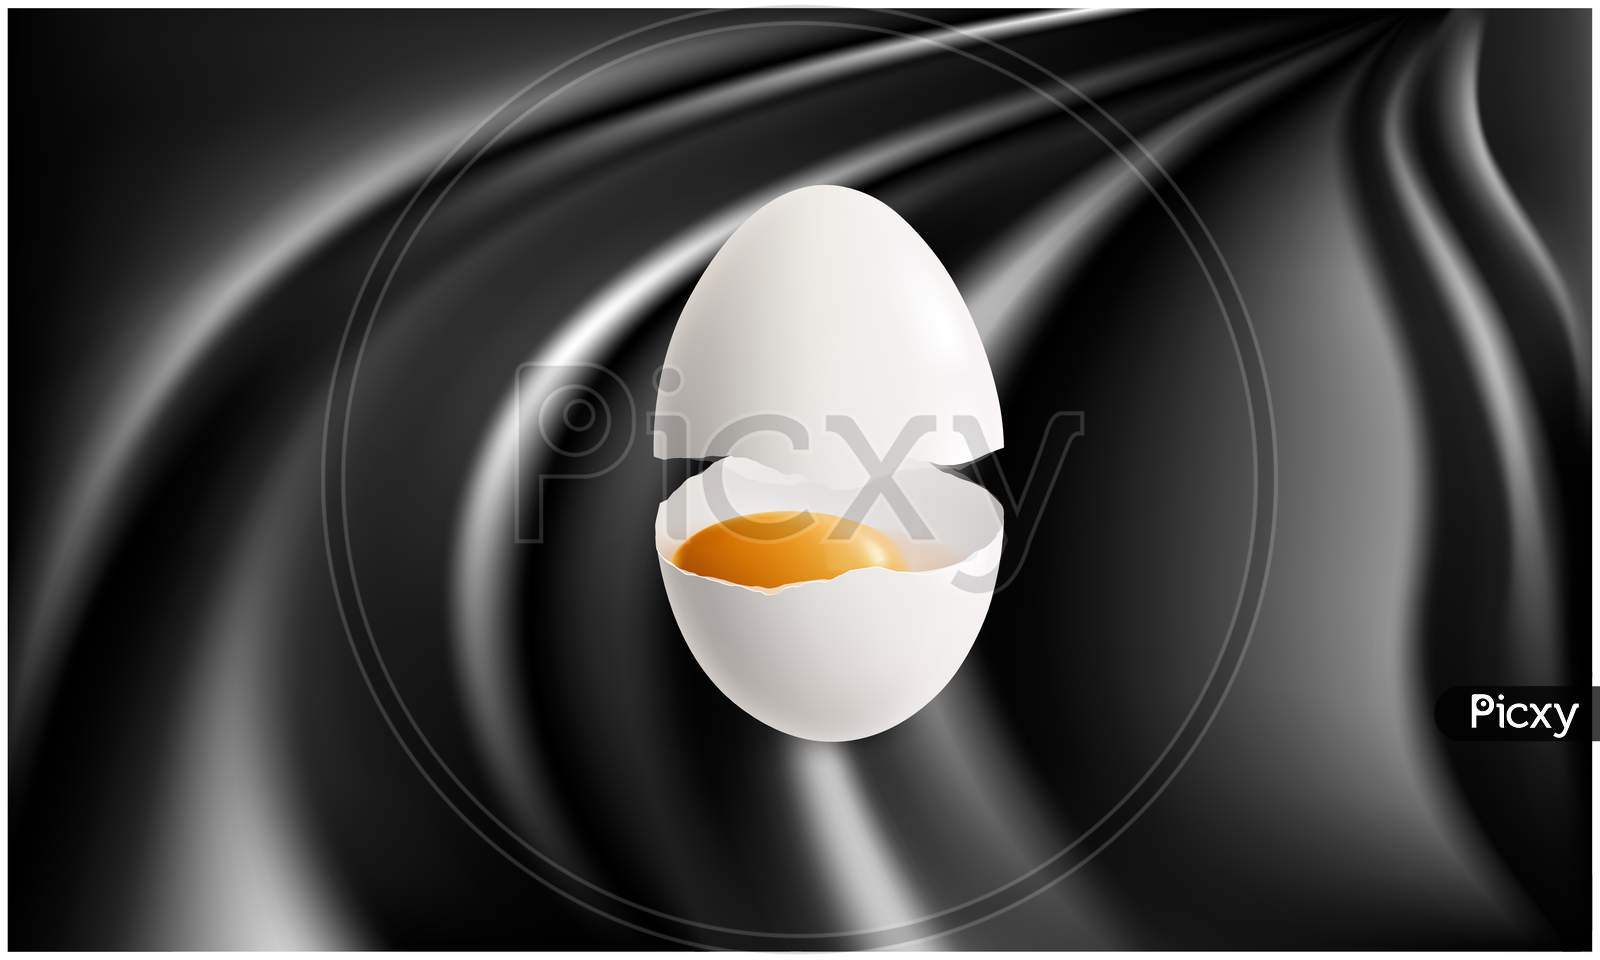 Broken Egg With Yellow Yolk On Abstract Black Surface